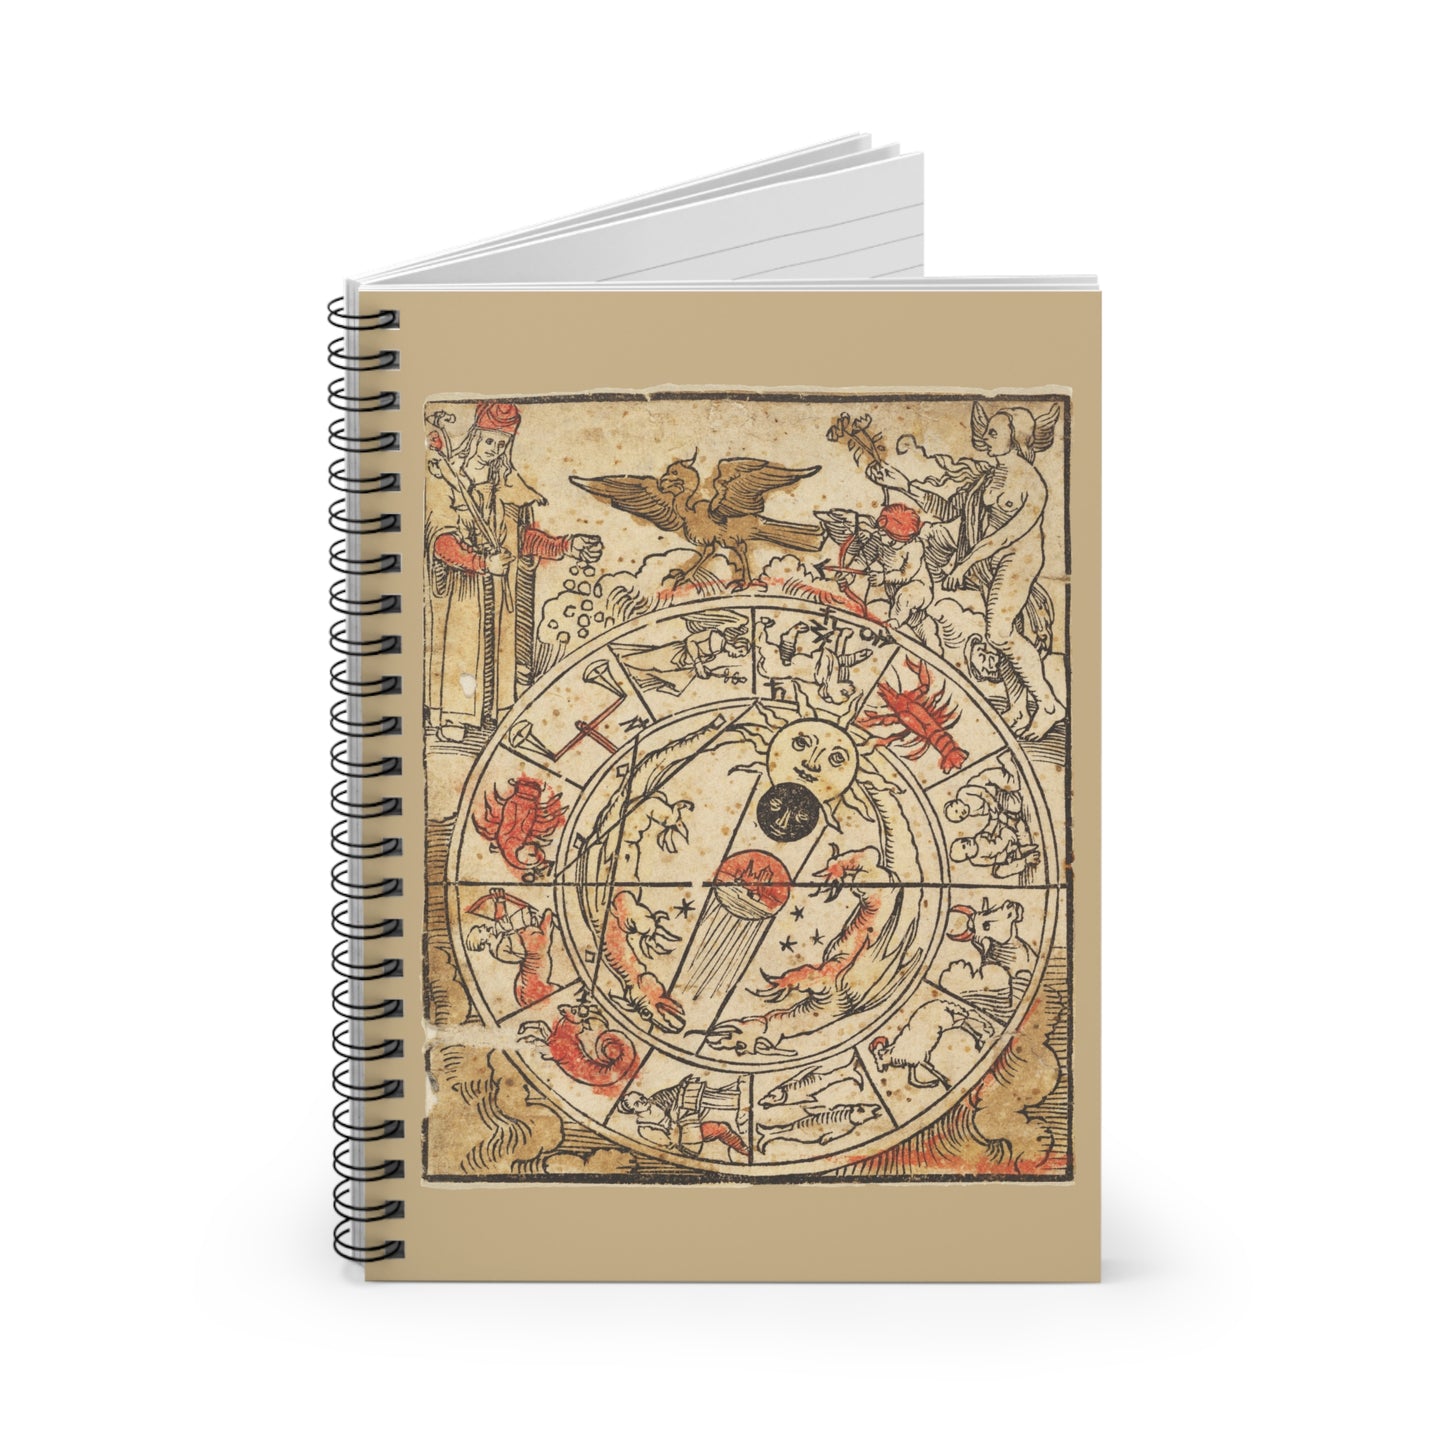 Chart of the Signs of the Zodiac with Venus, Cupid, and a Bishop Saint - Spiral Notebook - Ruled Line